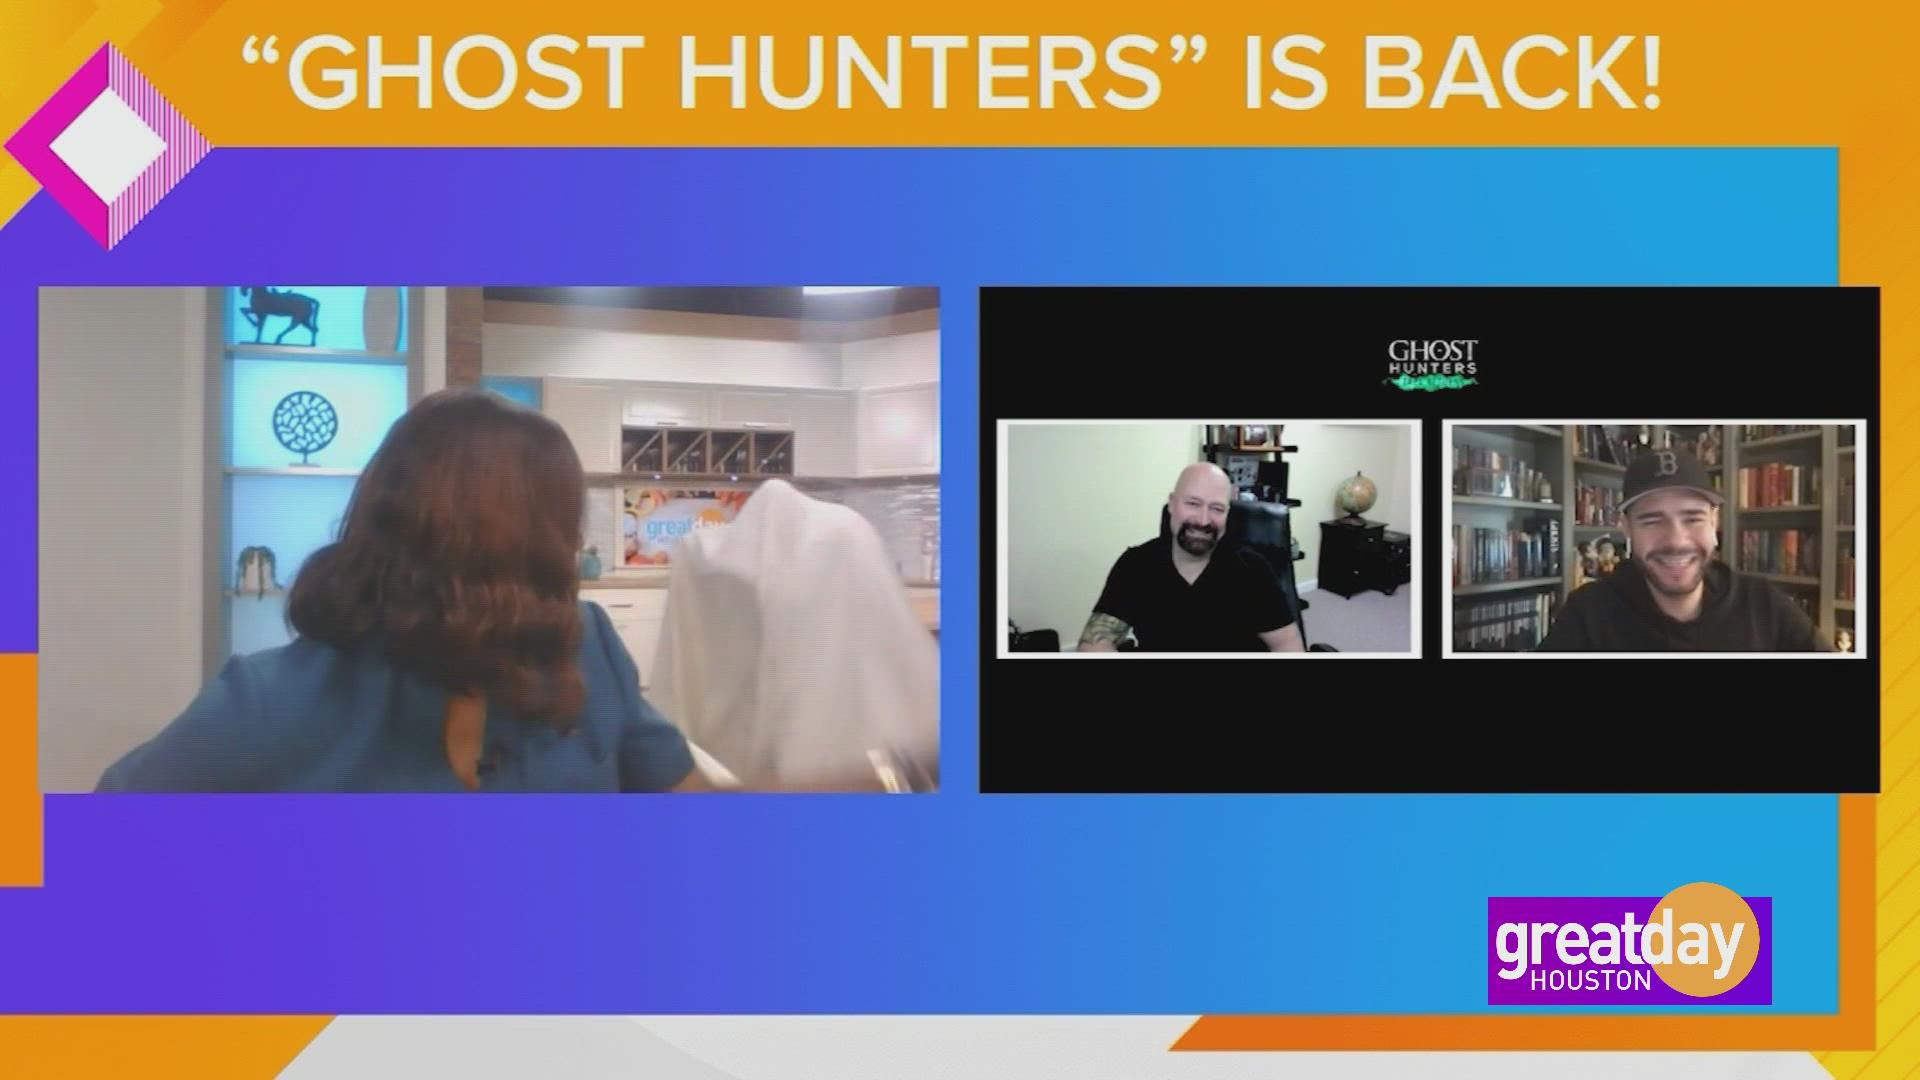 Original "Ghost Hunters" Jason Hawes and Steve Gonsalves chat about the legacy of their show, now on discovery+